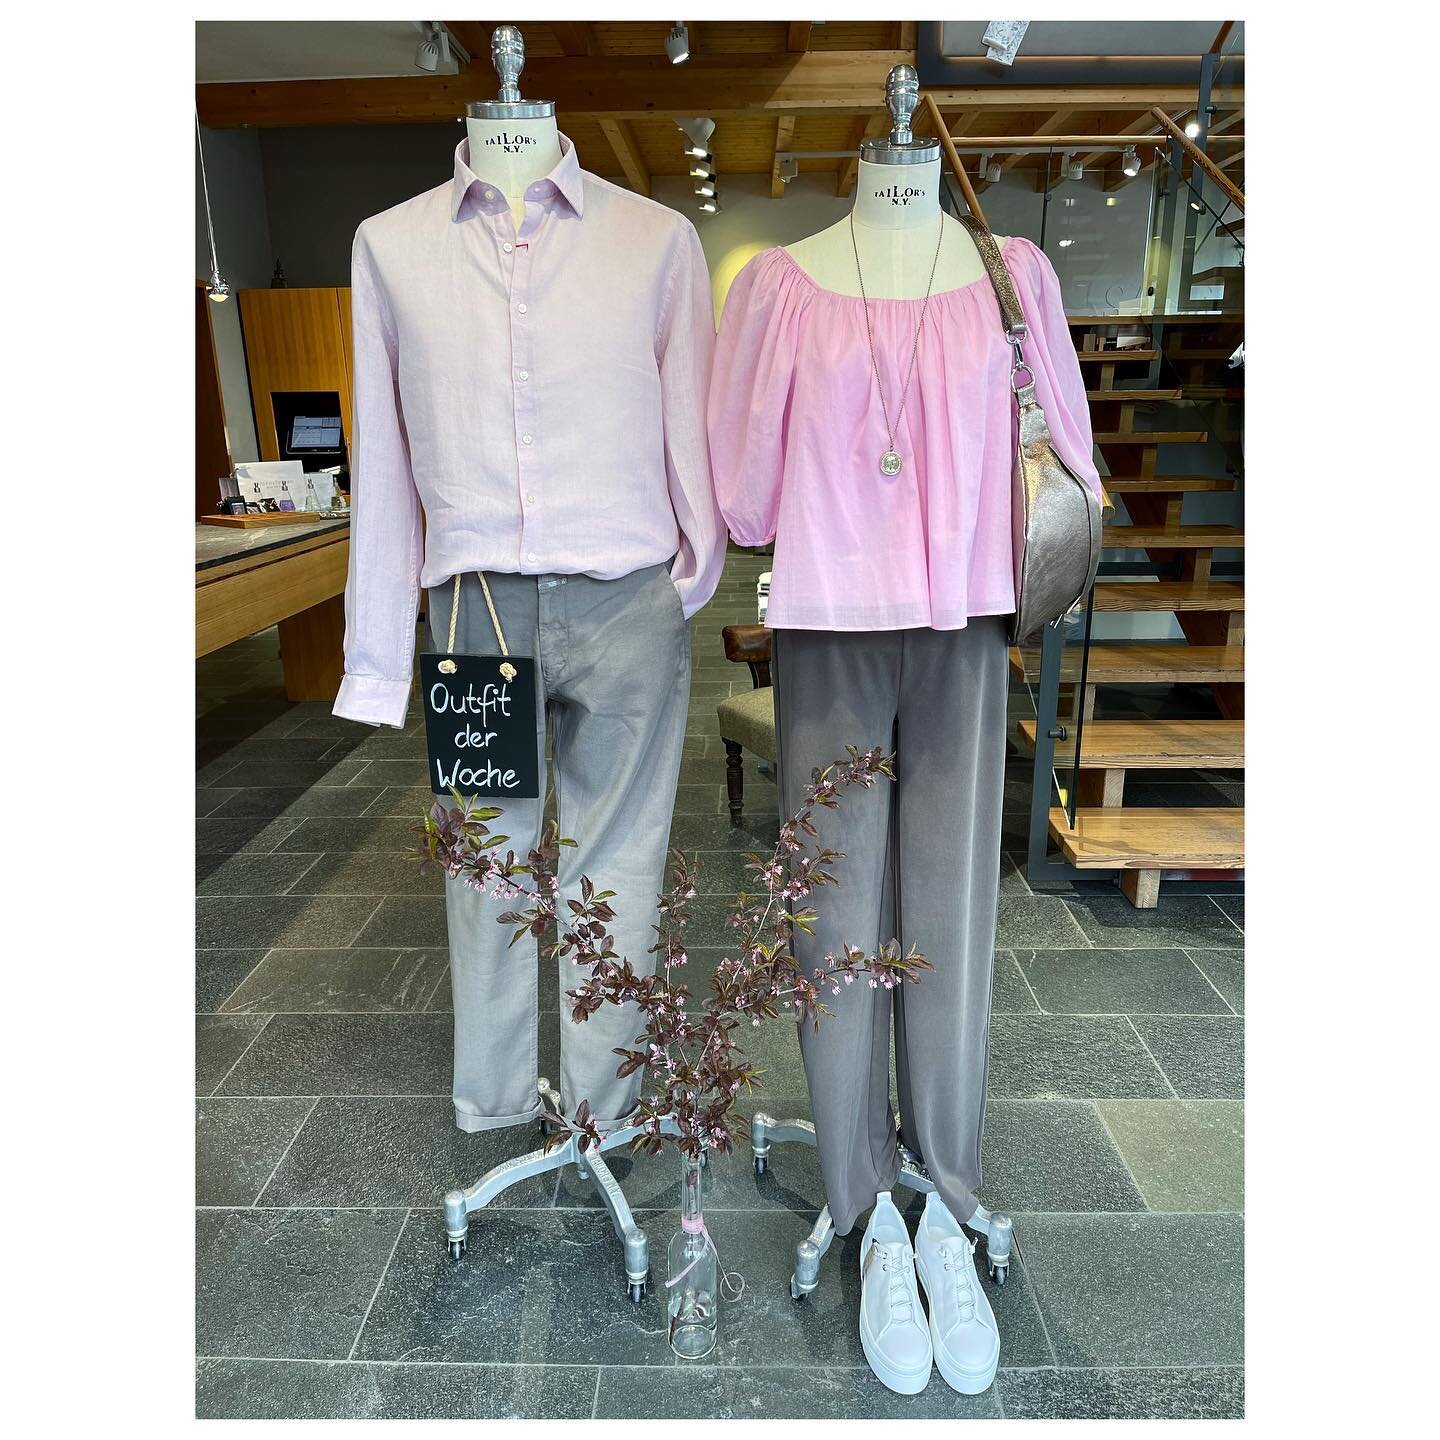 Outfit der Woche #17 

Fr&uuml;hlingsgef&uuml;hle 🌸

#spring #springsummer #shopping #fashion #obermaiselstein #new #newcollection